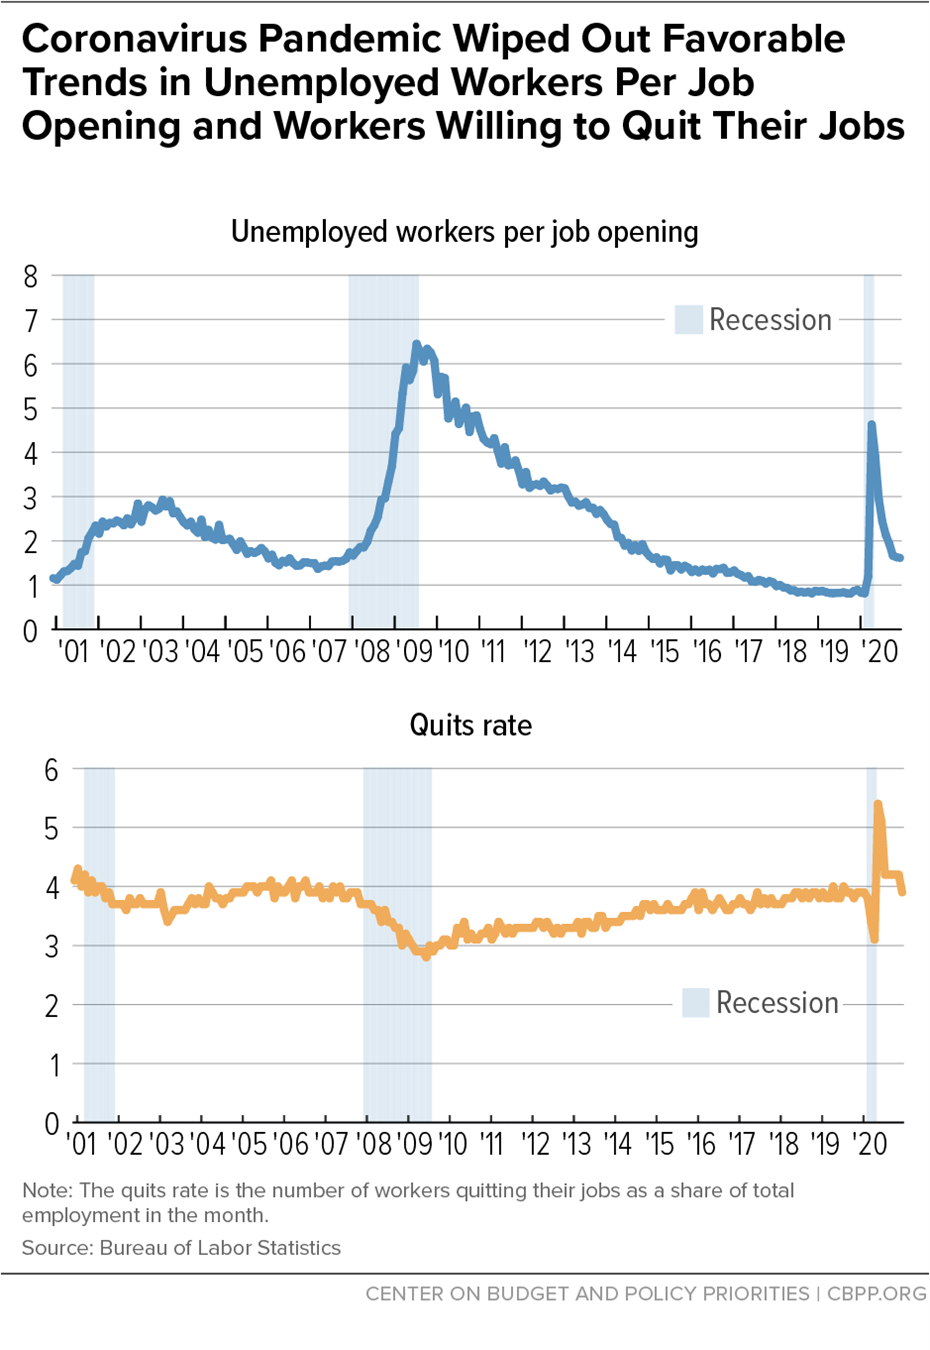 Coronavirus Pandemic Wiped Out Favorable Trends in Unemployed Workers Per Job Opening and Workers Willing to Quit Their Jobs